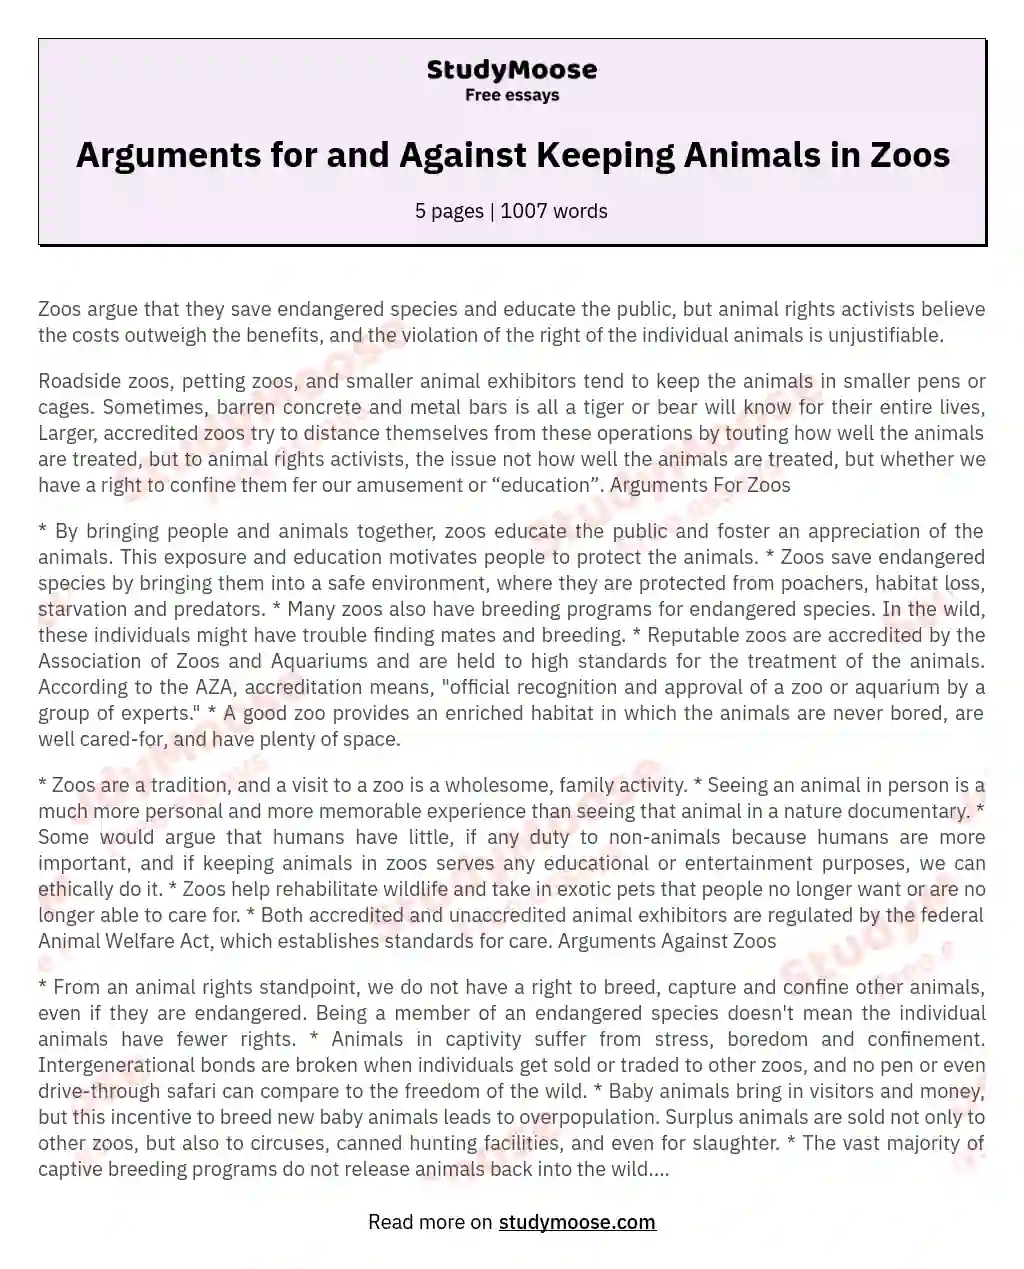 Arguments for and Against Keeping Animals in Zoos - Free Essay Example